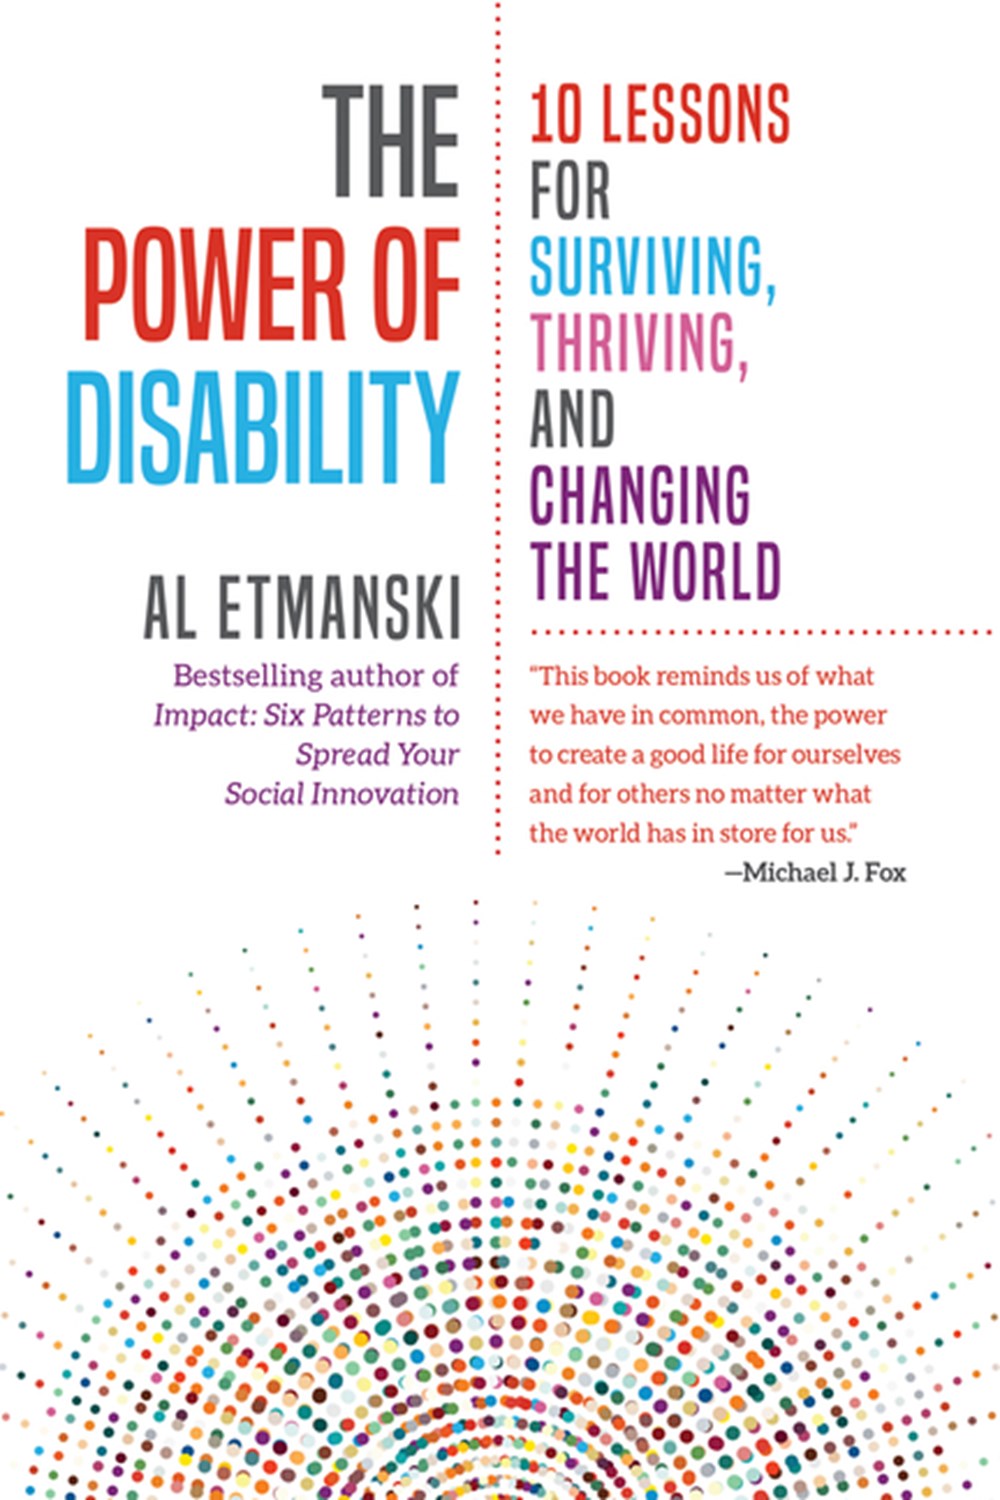 Power of Disability 10 Lessons for Surviving, Thriving, and Changing the World